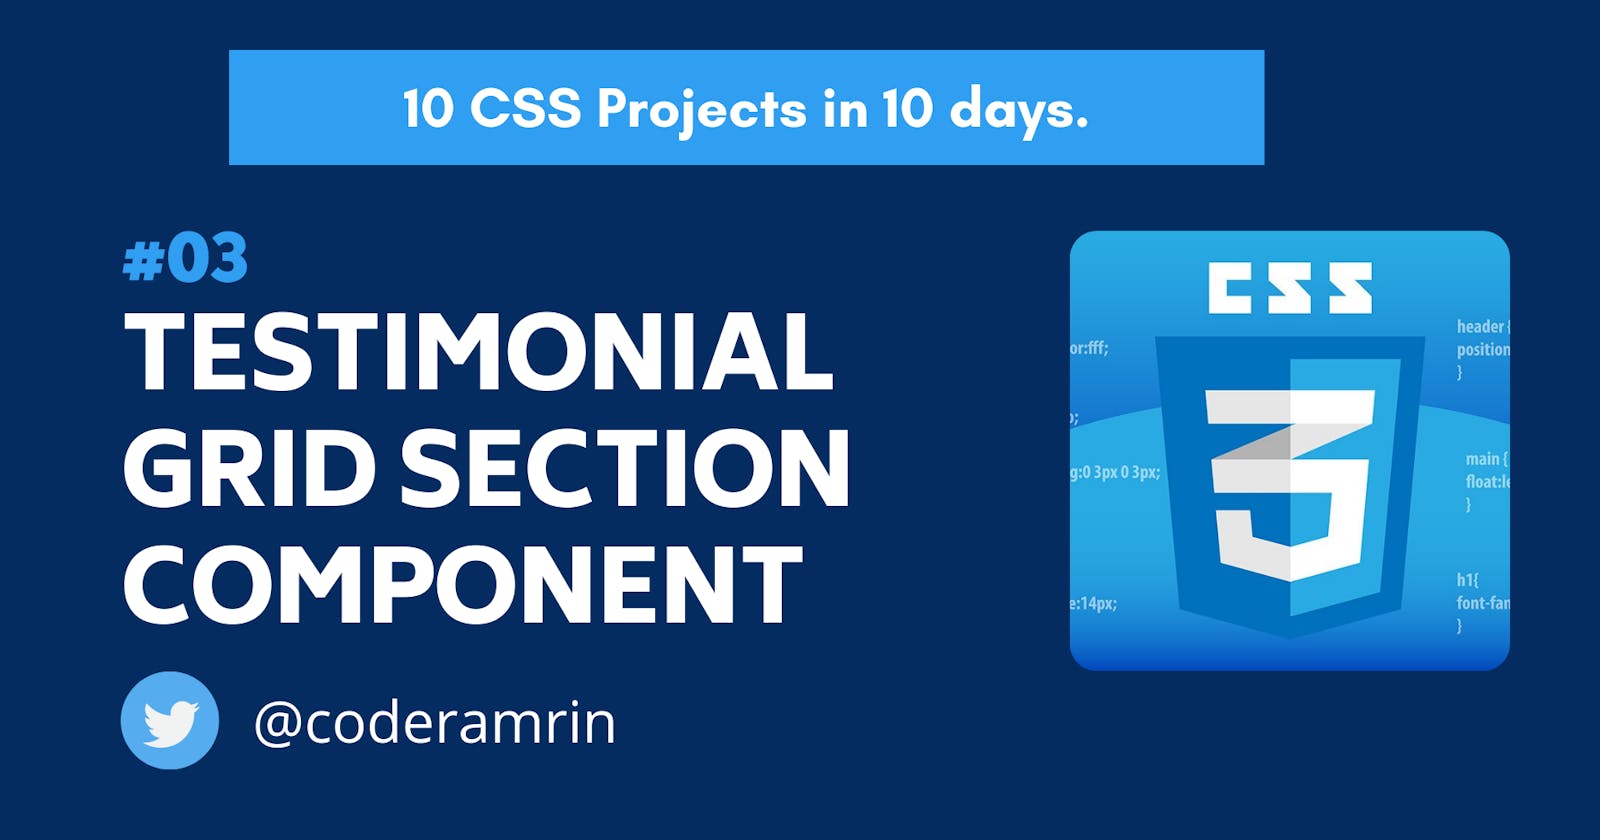 Build 10 CSS Projects in 10 days: Project 3